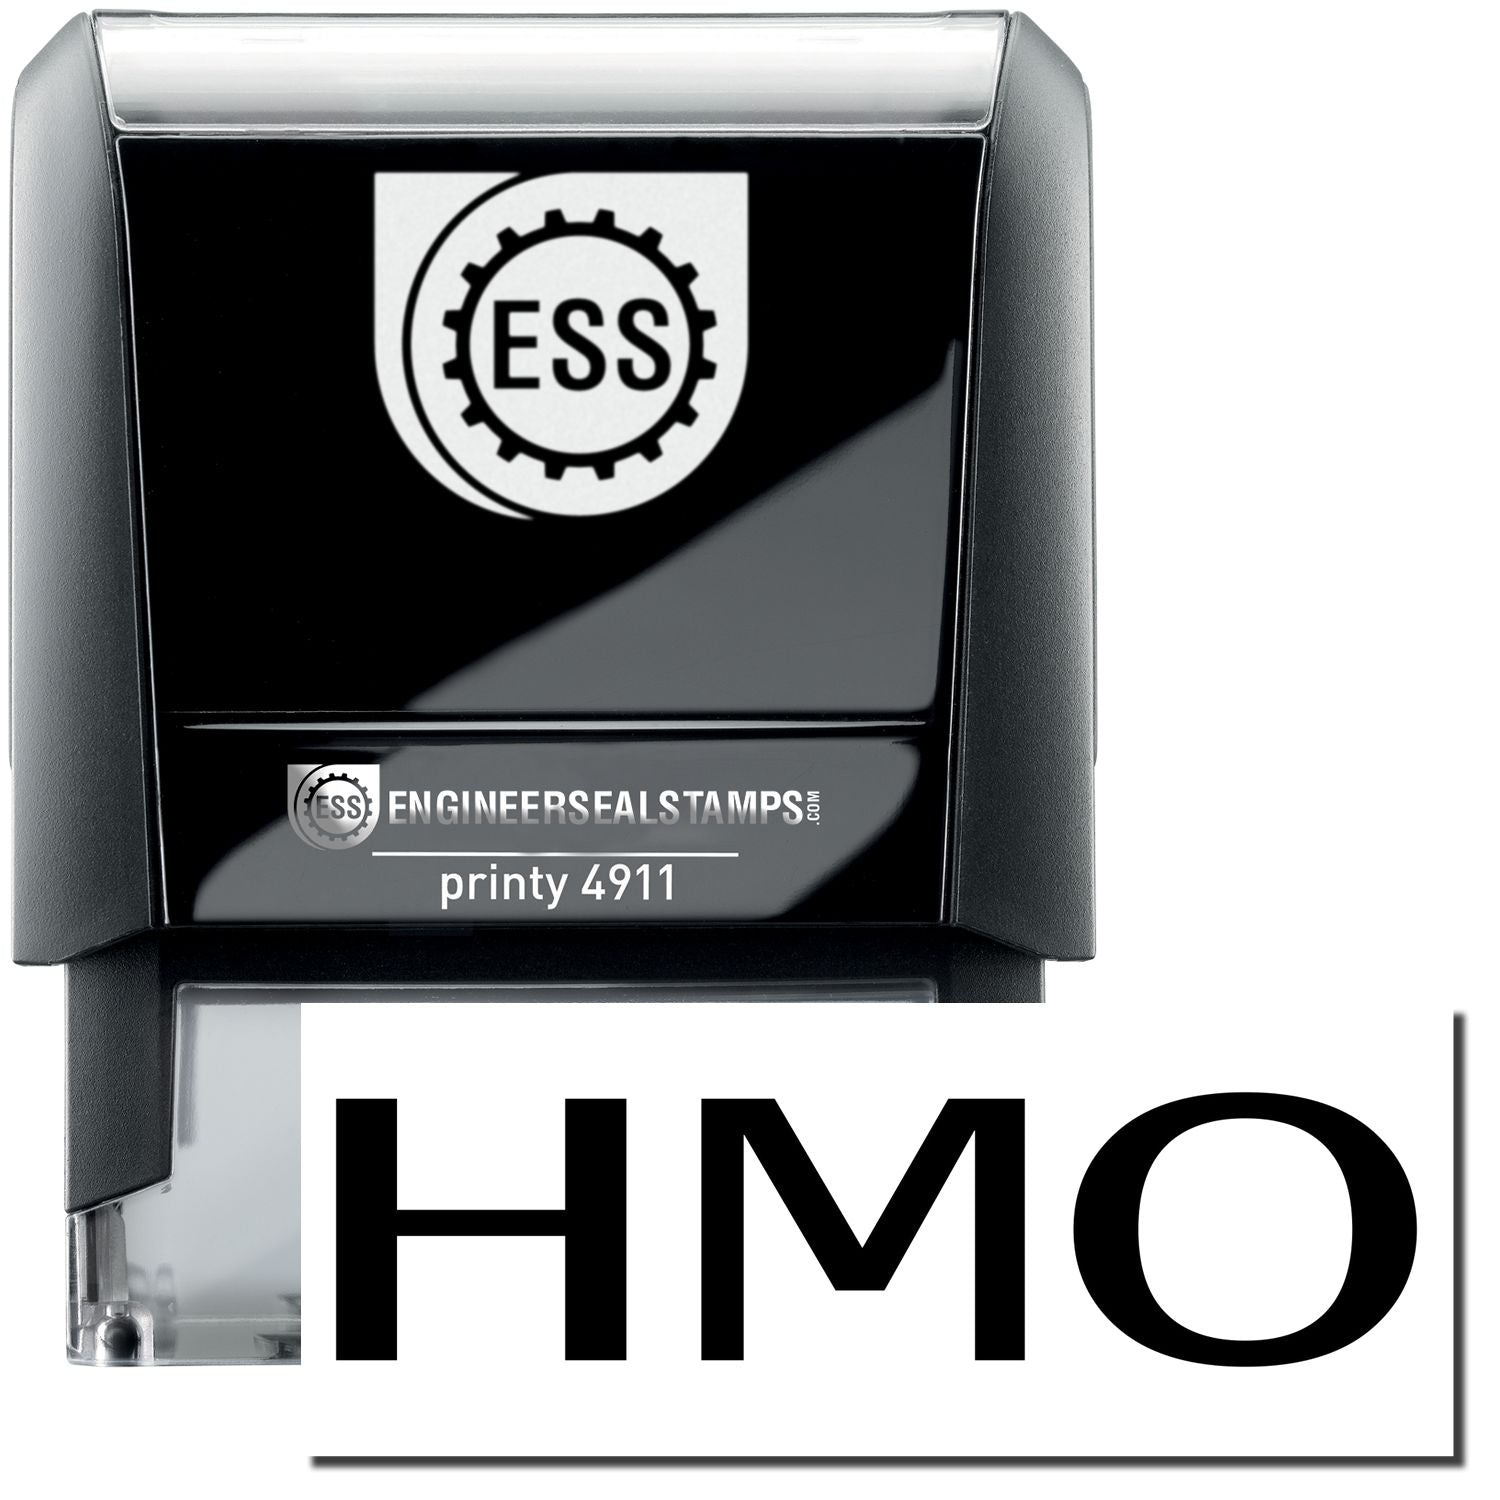 A self-inking stamp with a stamped image showing how the text "HMO" is displayed after stamping.